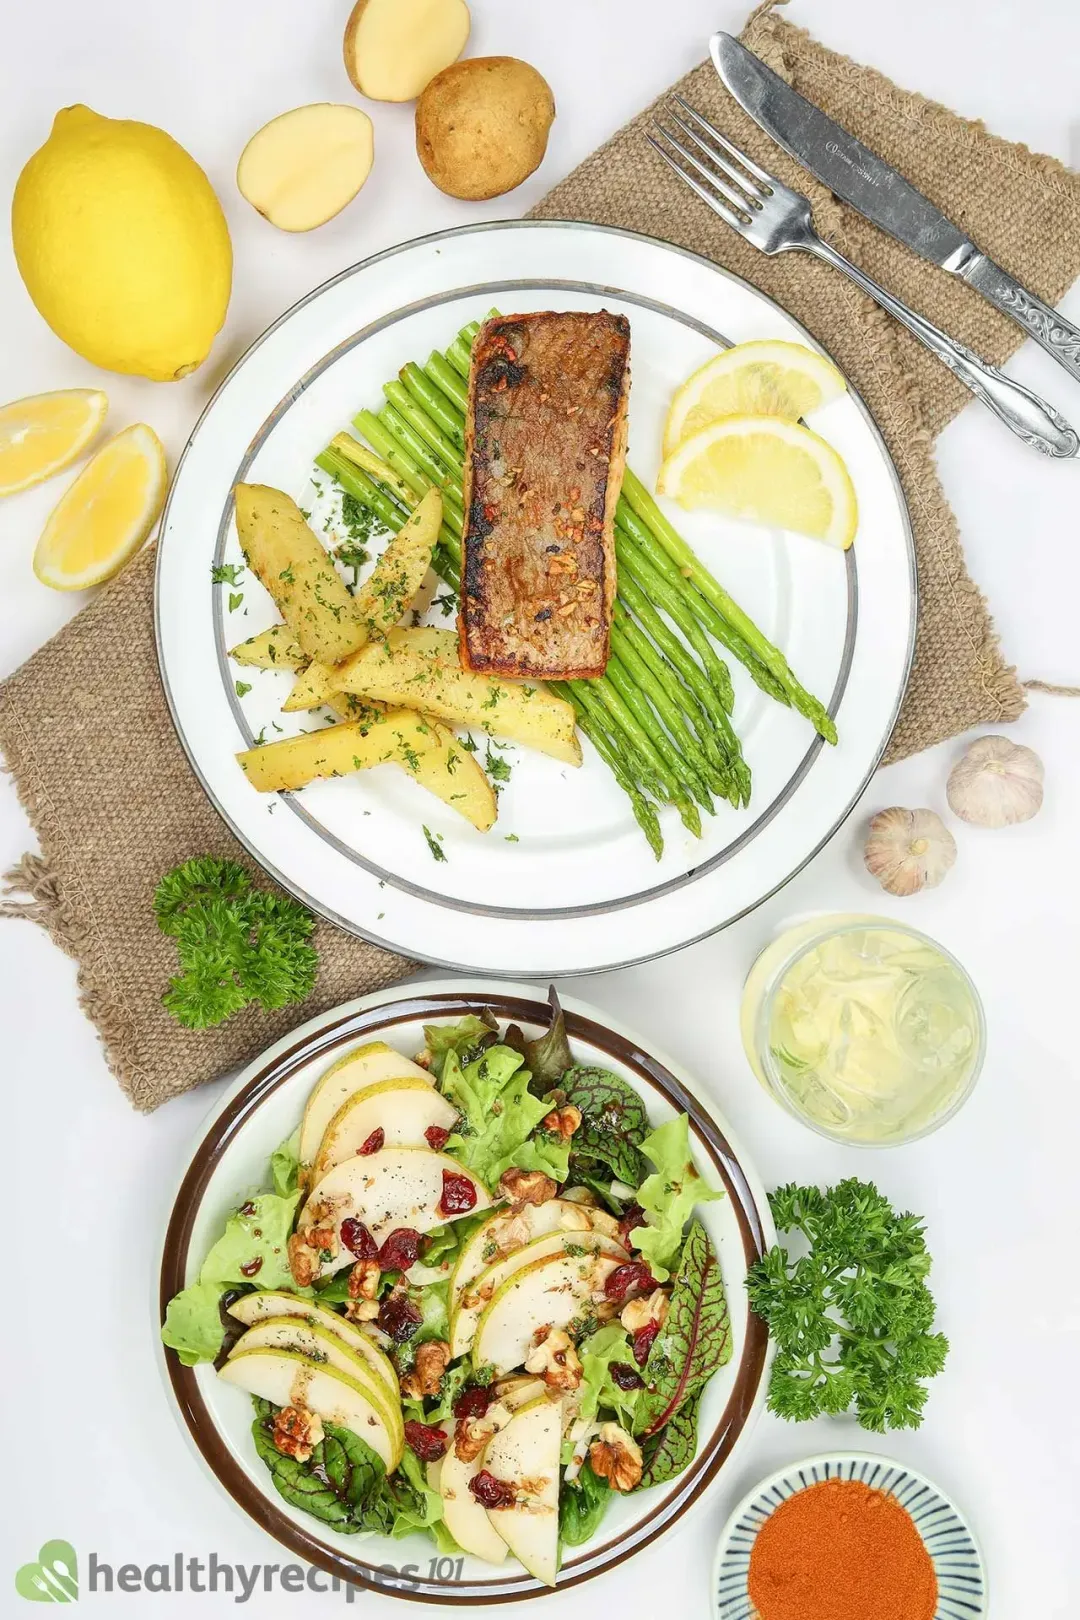 A flatlay of a lemon, lemon slices, potatoes, a pear salad, and a plate holding a salmon fillet, asparagus, potato wedges, and two lemon slices